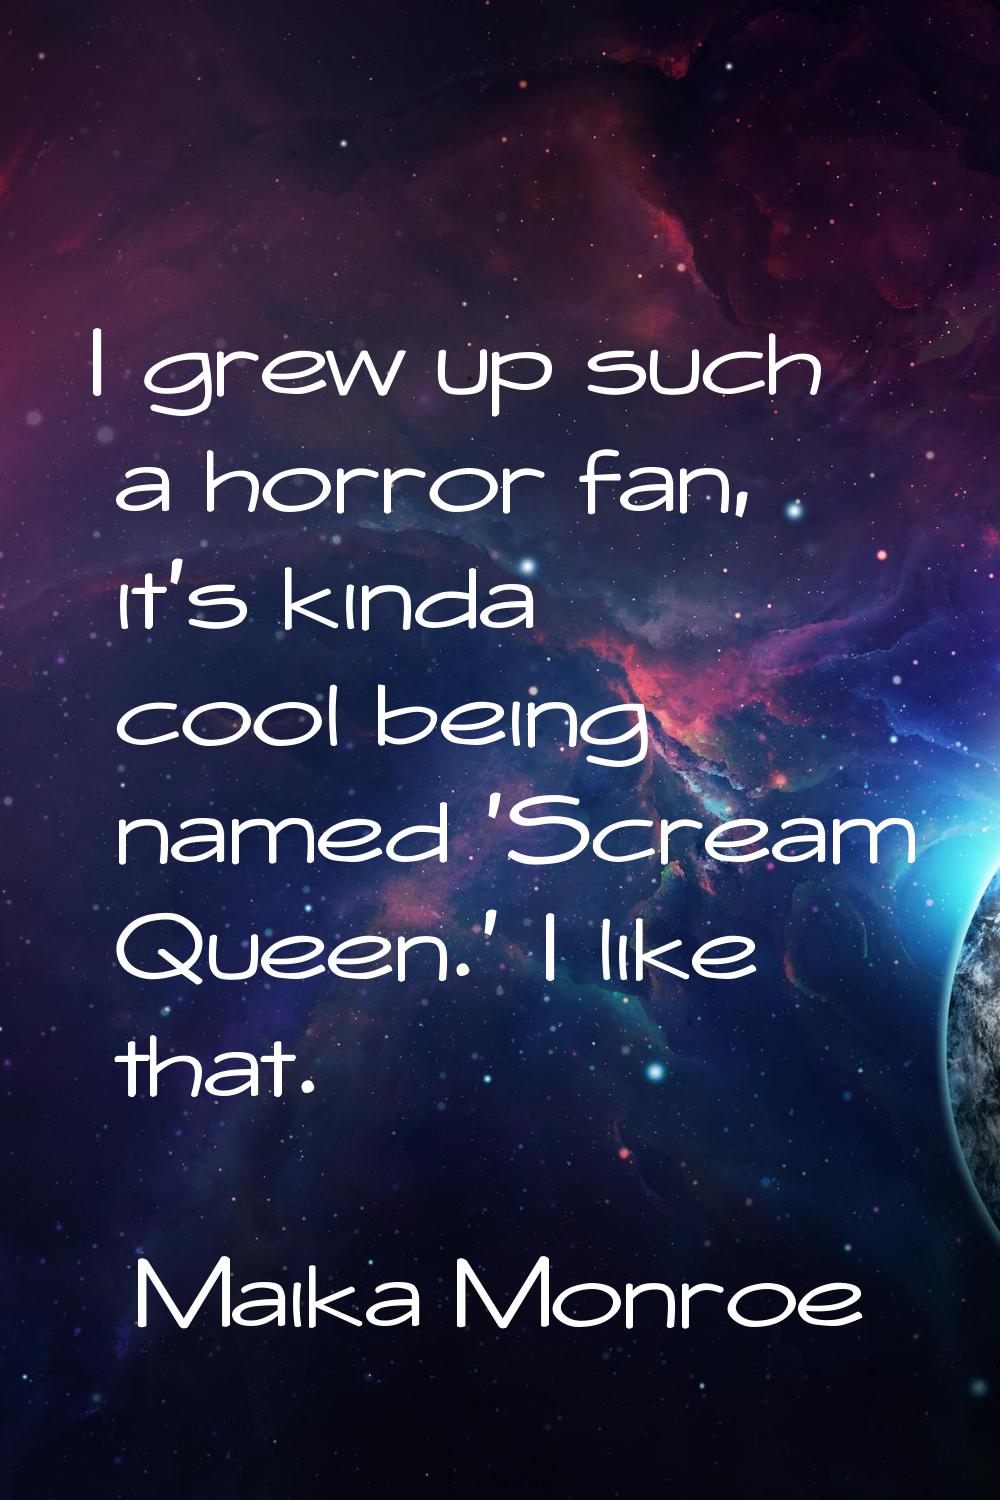 I grew up such a horror fan, it's kinda cool being named 'Scream Queen.' I like that.